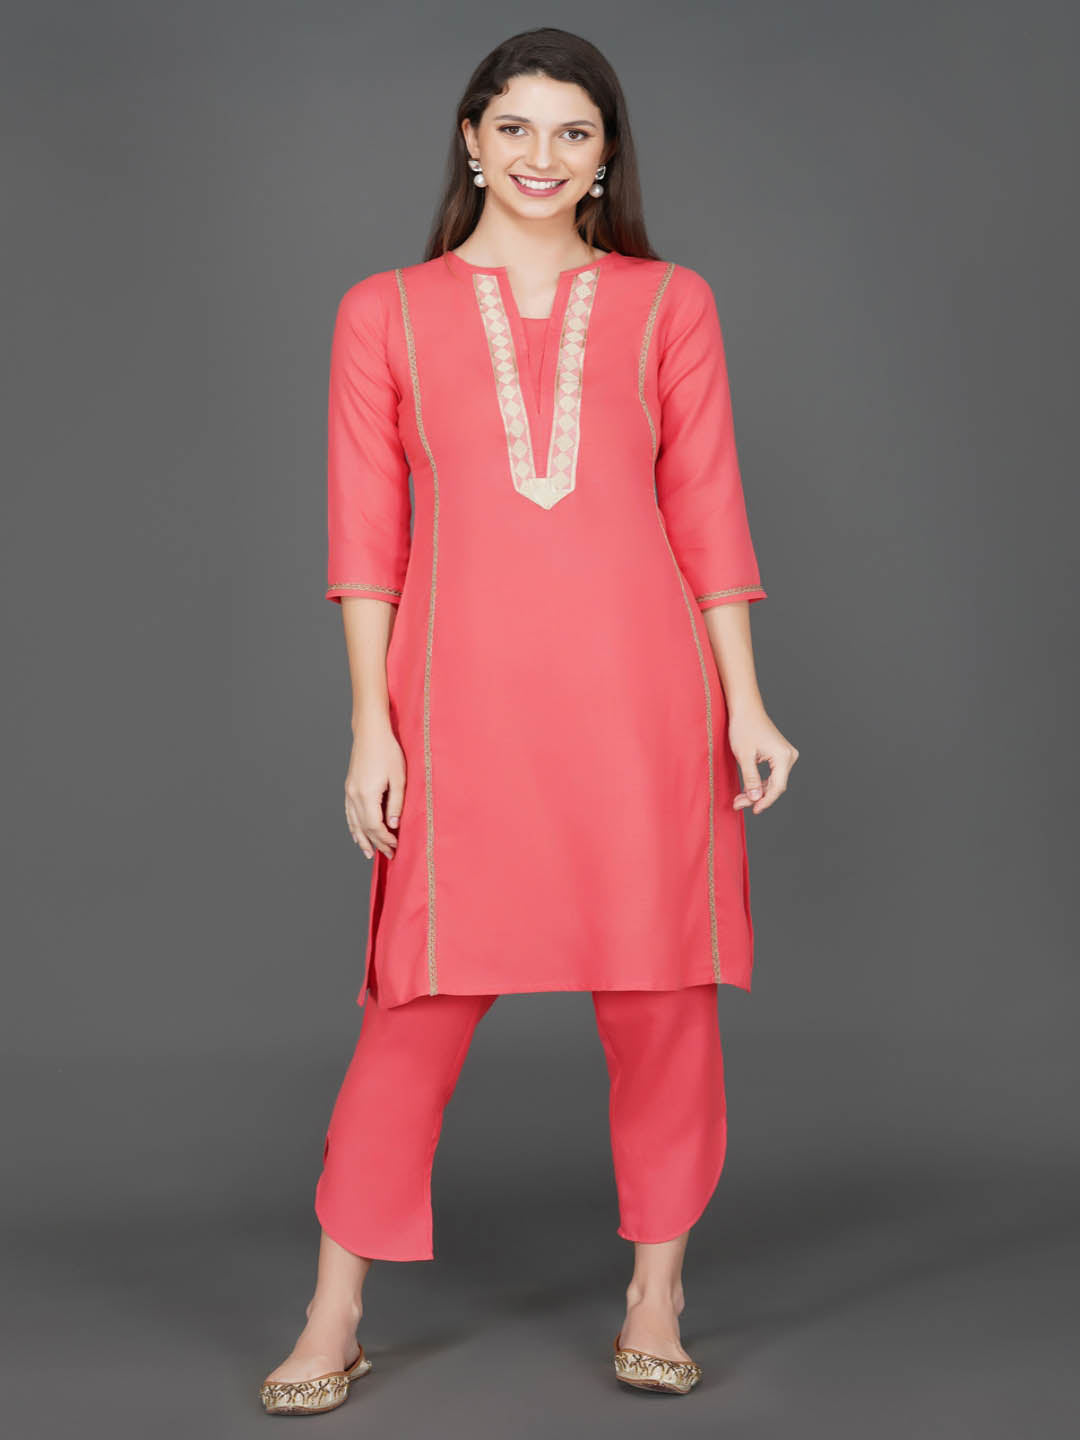 Pink Lace And Gota Embesllised Kurta Only